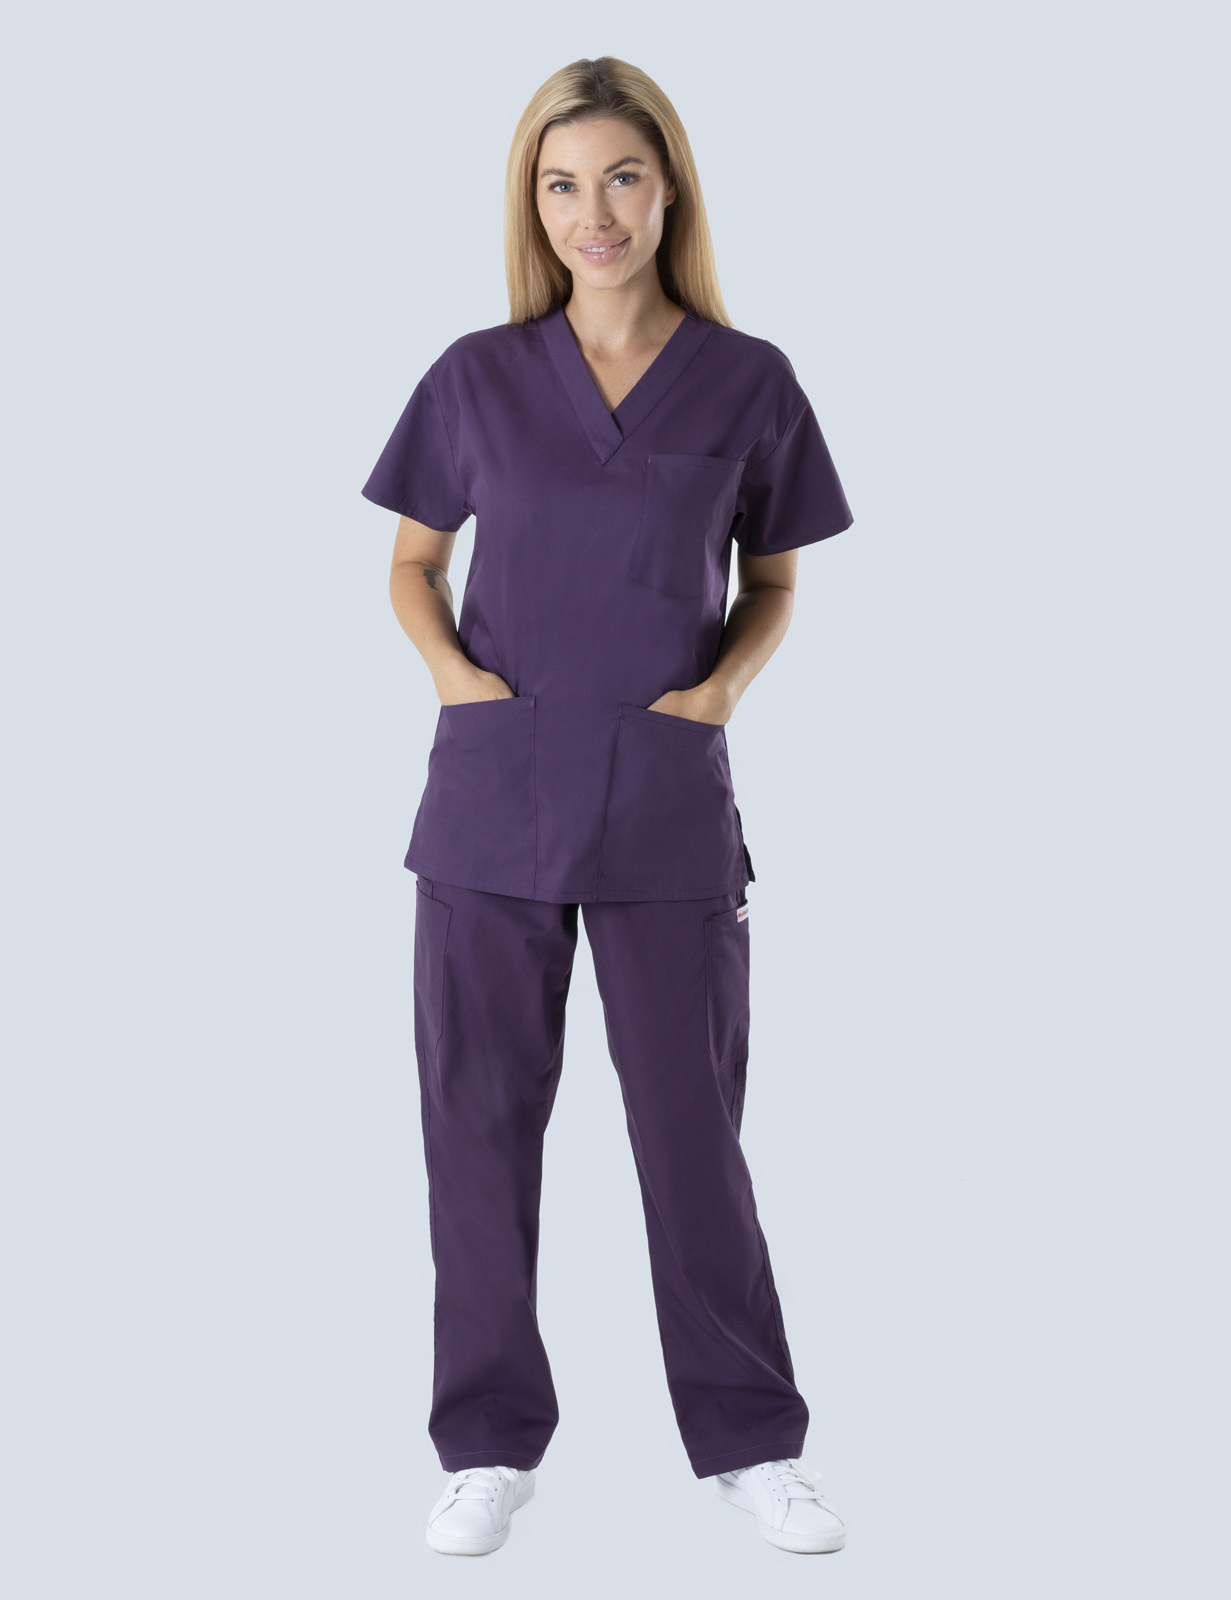 RBWH - Grantley Stable Neonatal Unit (4 Pocket Scrub Top and Cargo Pants in Aubergine incl Logos)